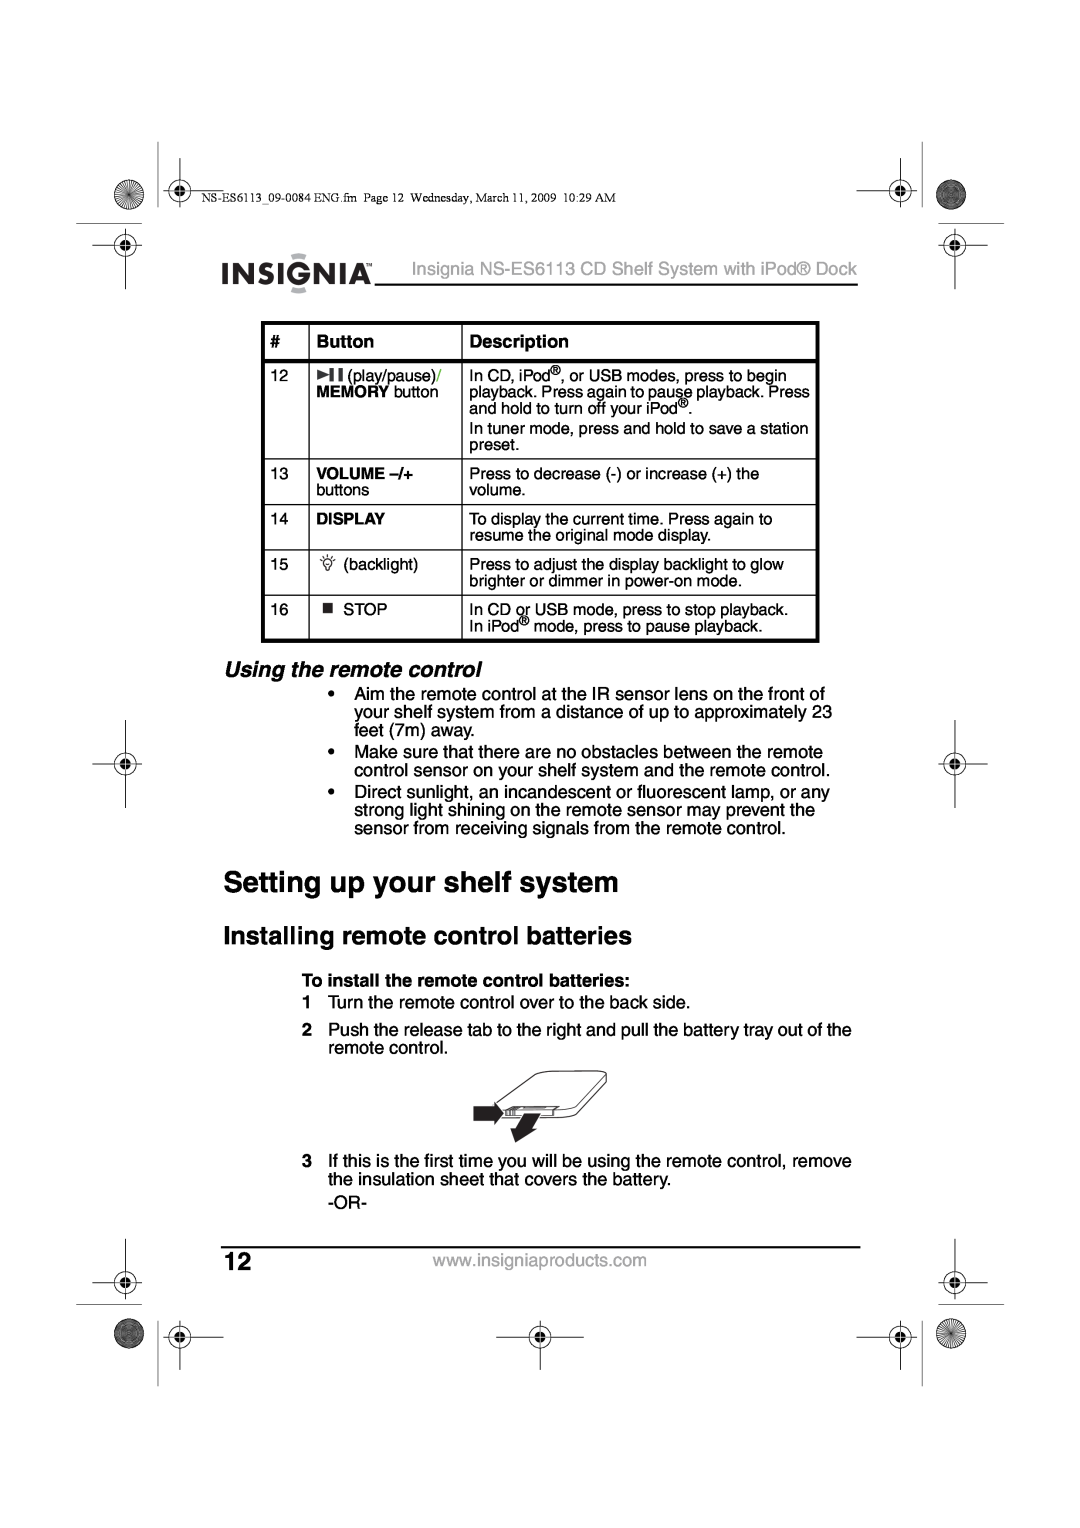 Insignia NS-ES6113 Setting up your shelf system, Installing remote control batteries, Using the remote control, Button 